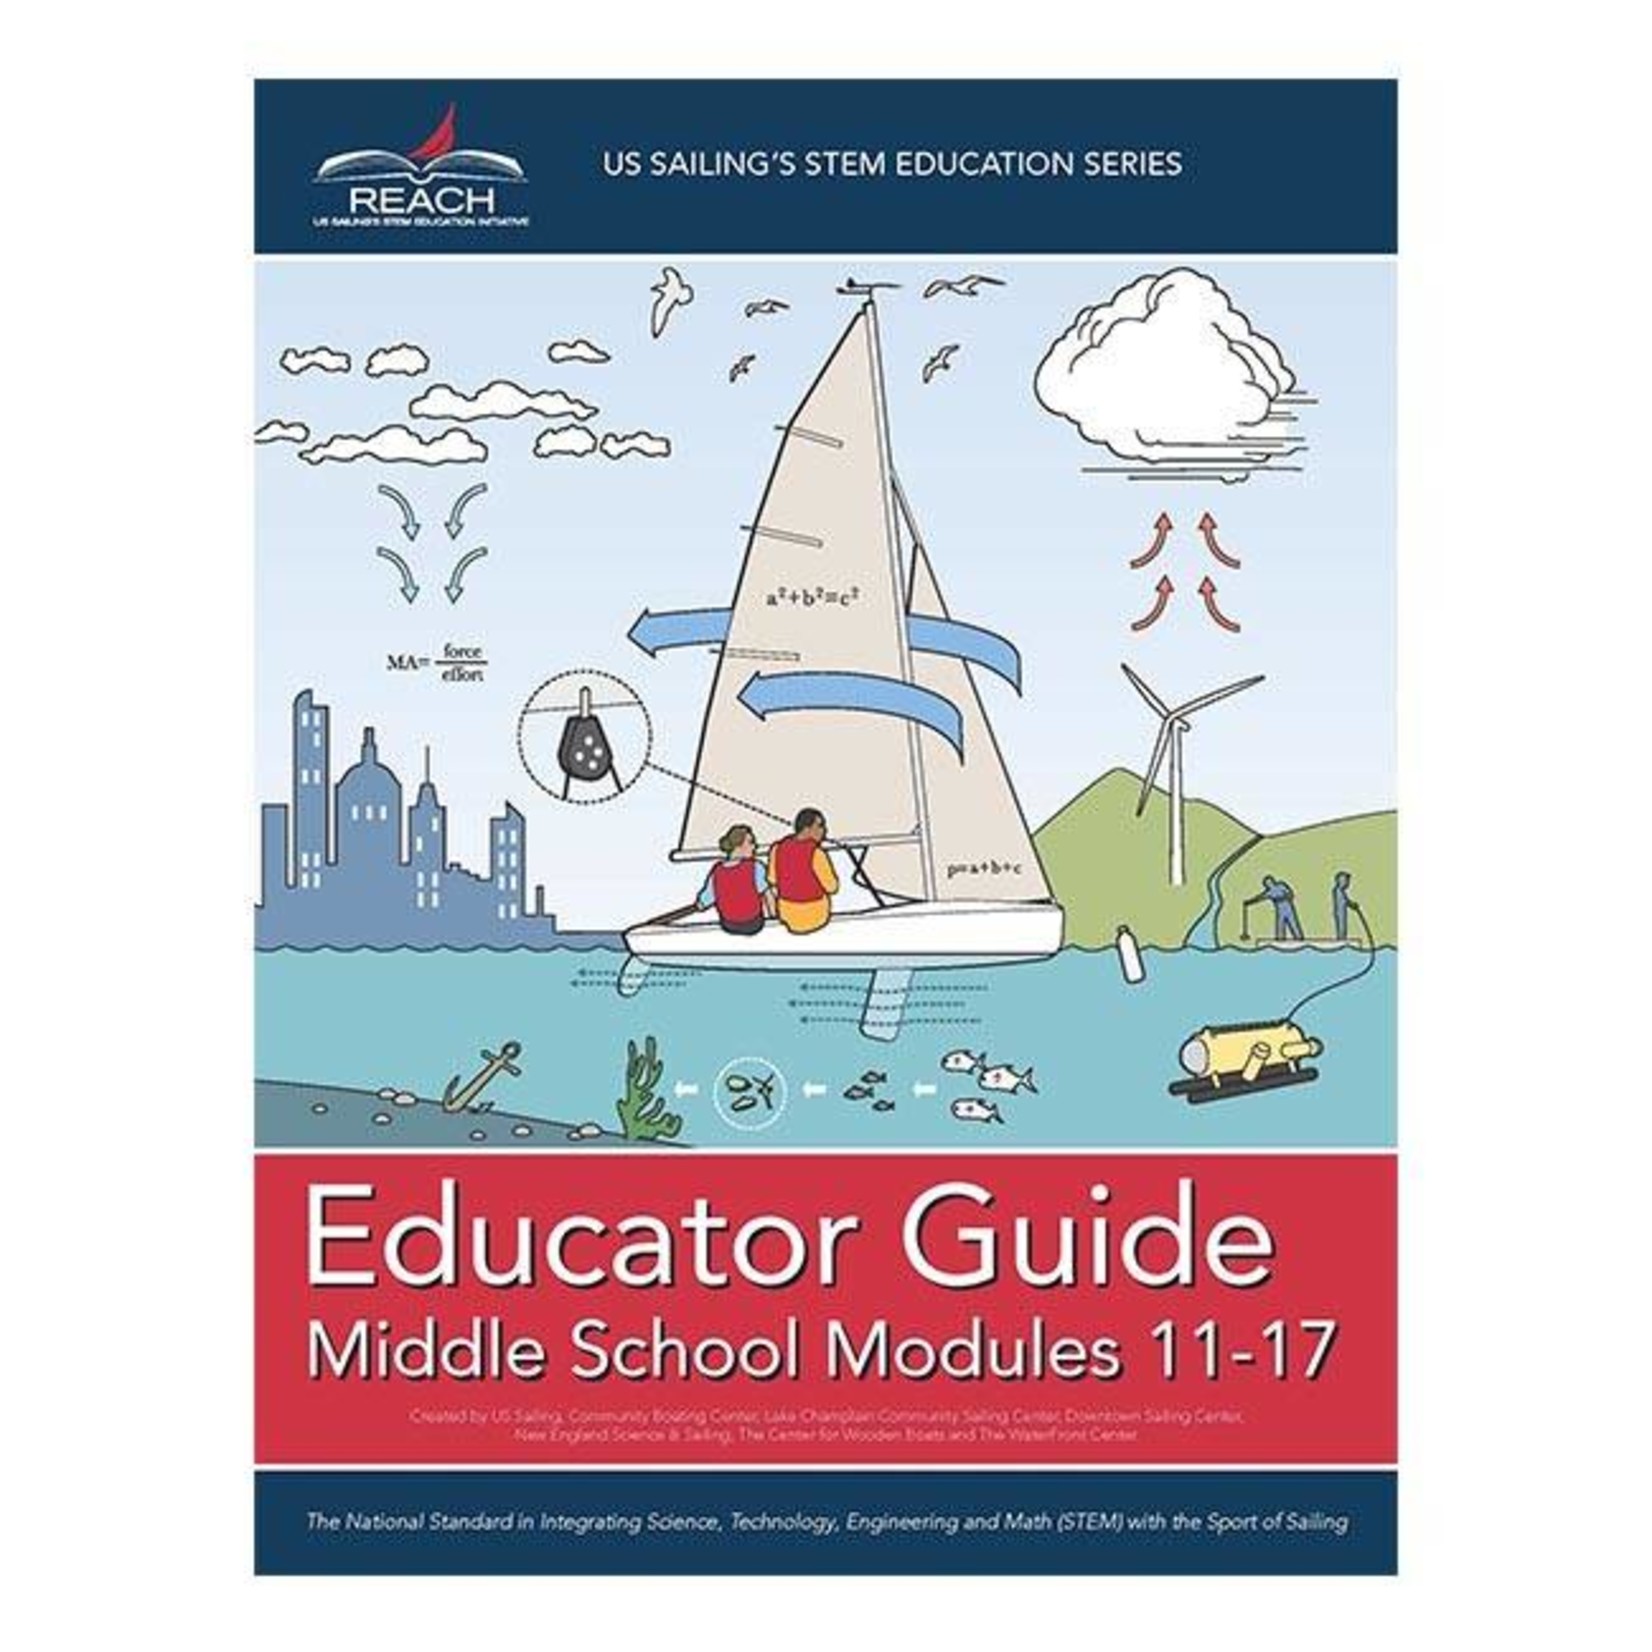 TEXT Reach Educator Guide Middle School Modules 11-17